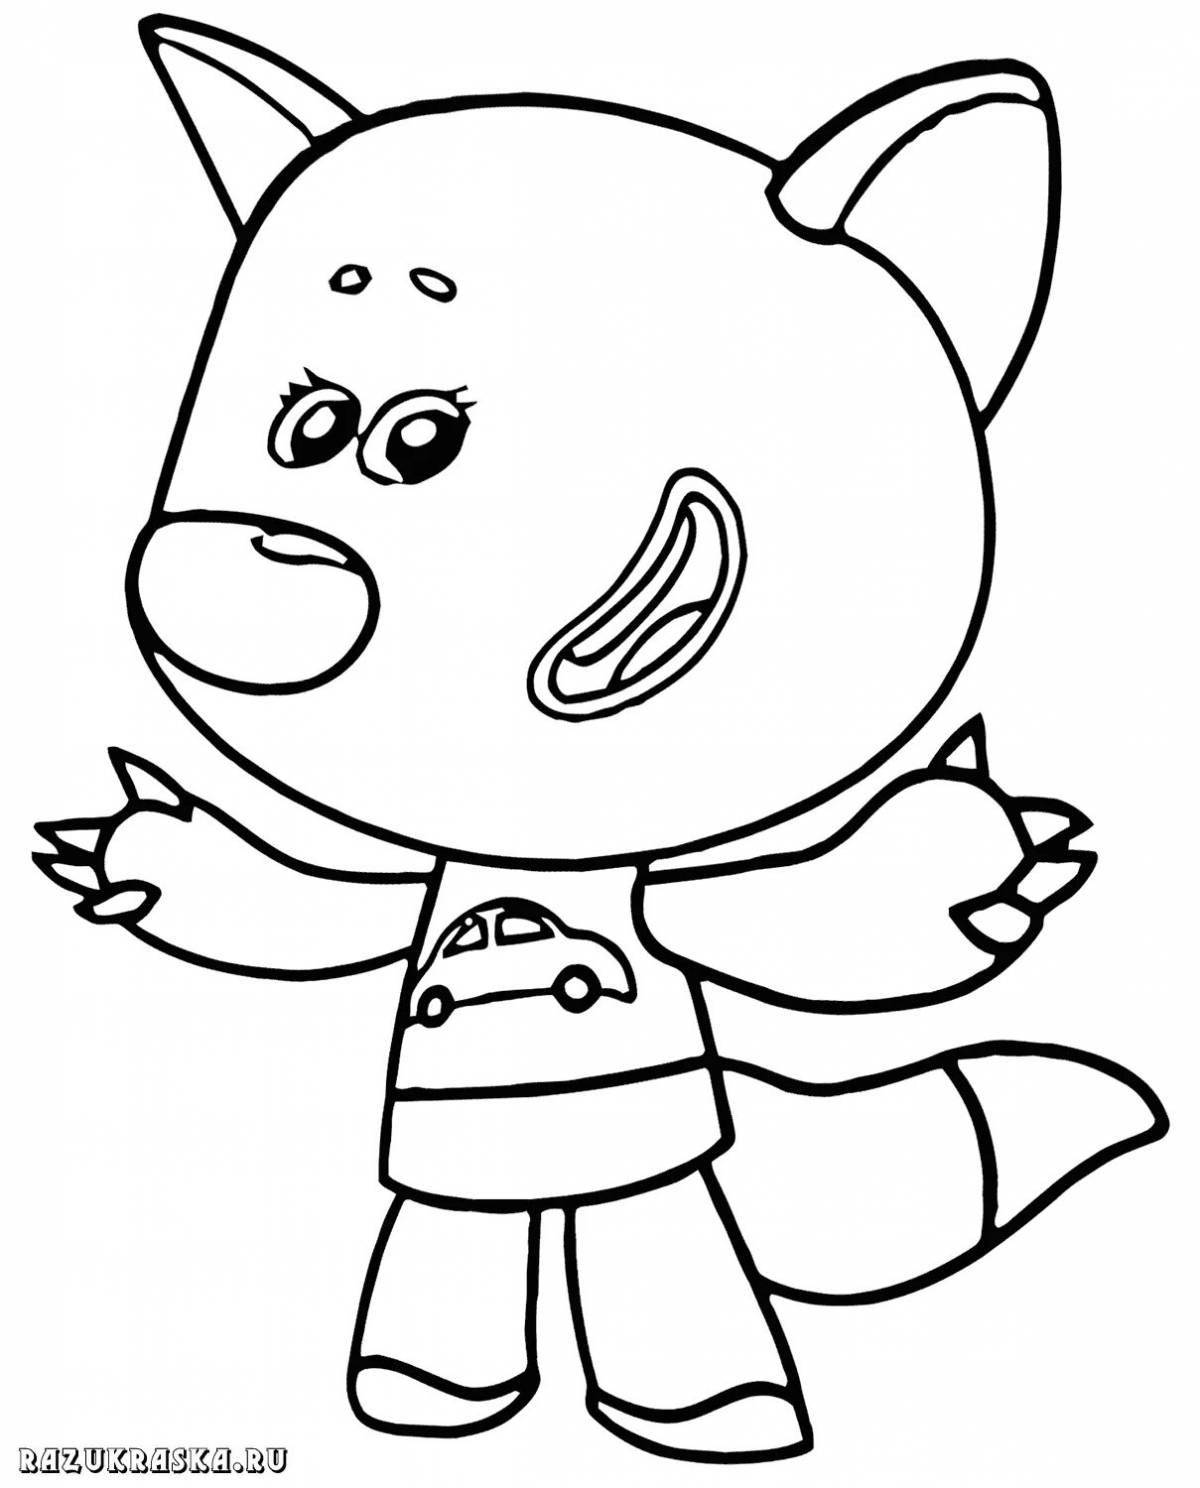 Teddy bear coloring page